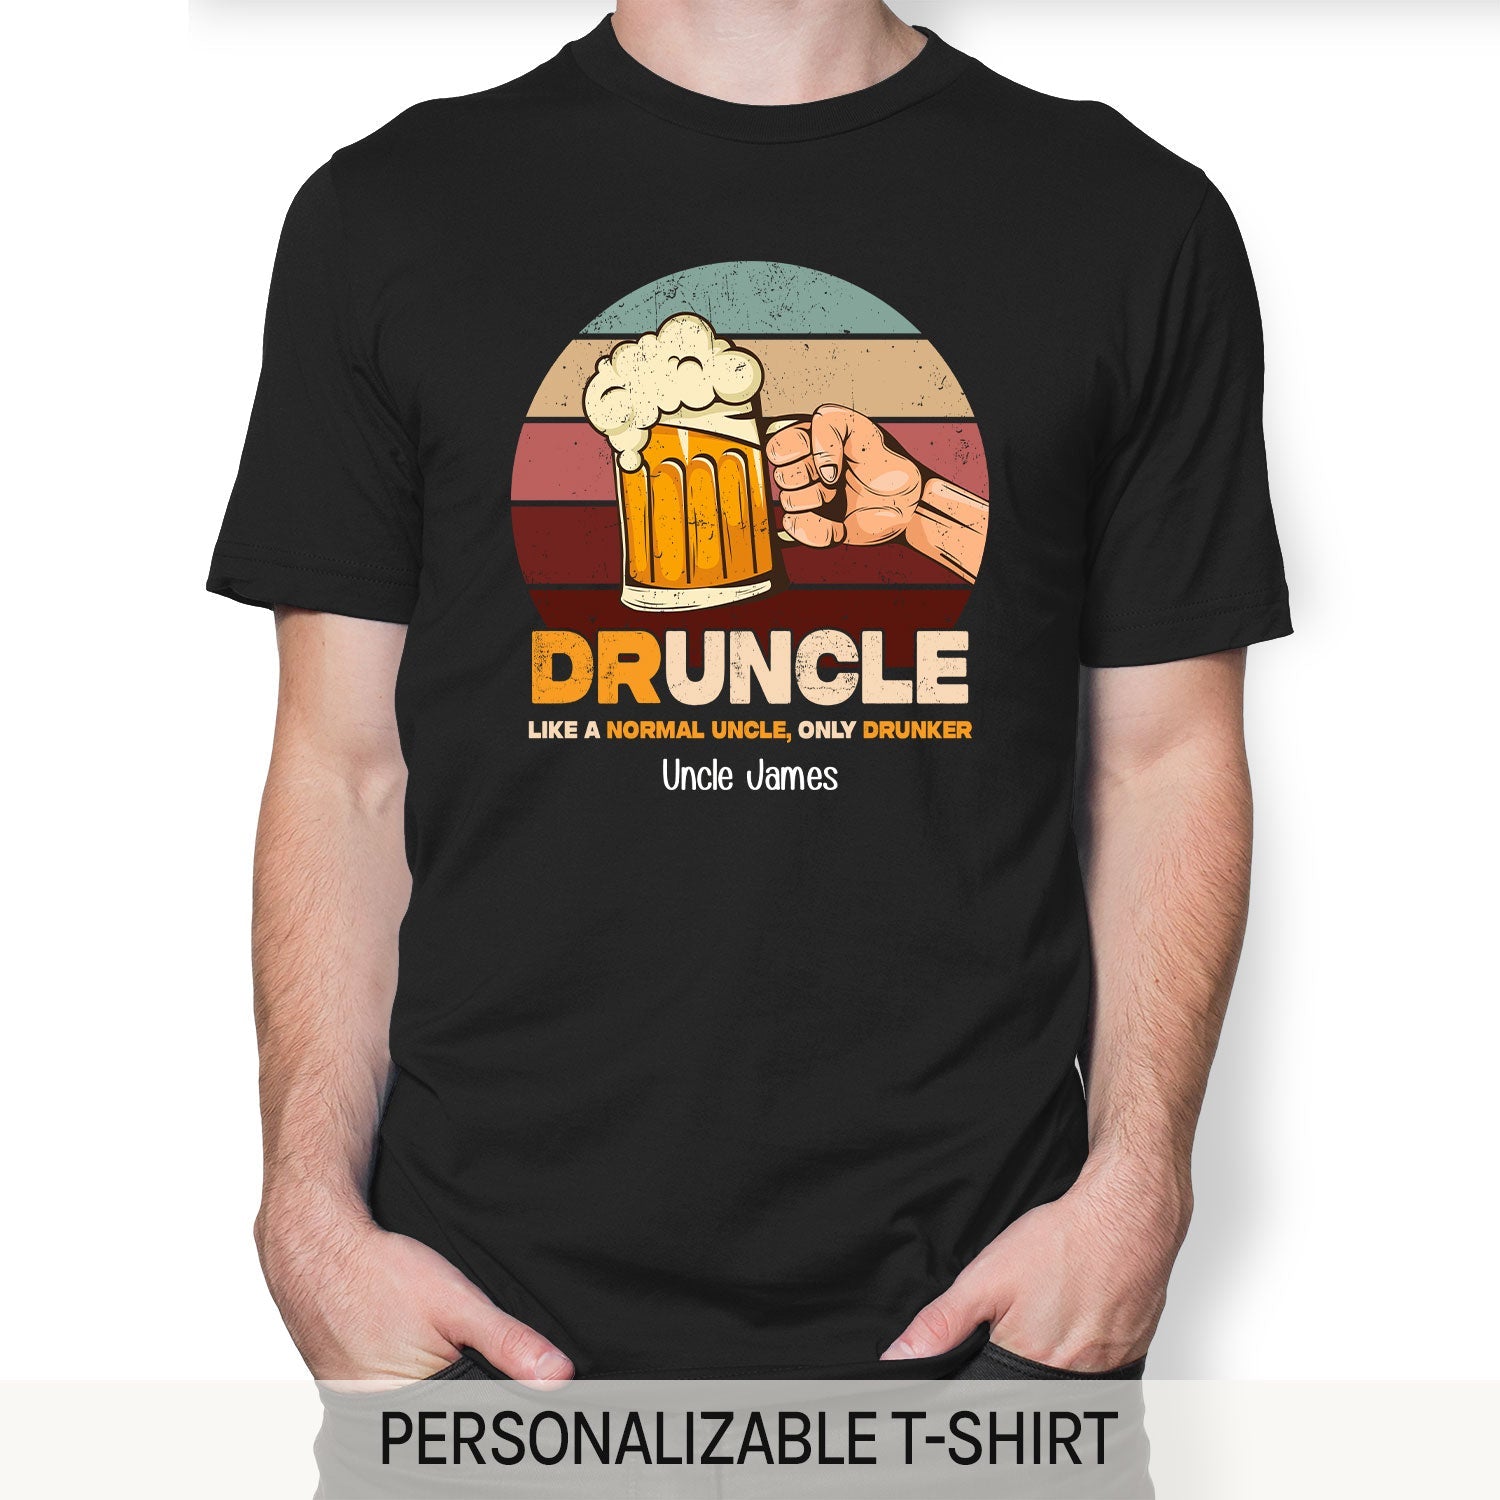 Druncle - Personalized Birthday or Christmas gift For Uncle - Custom Tshirt - MyMindfulGifts